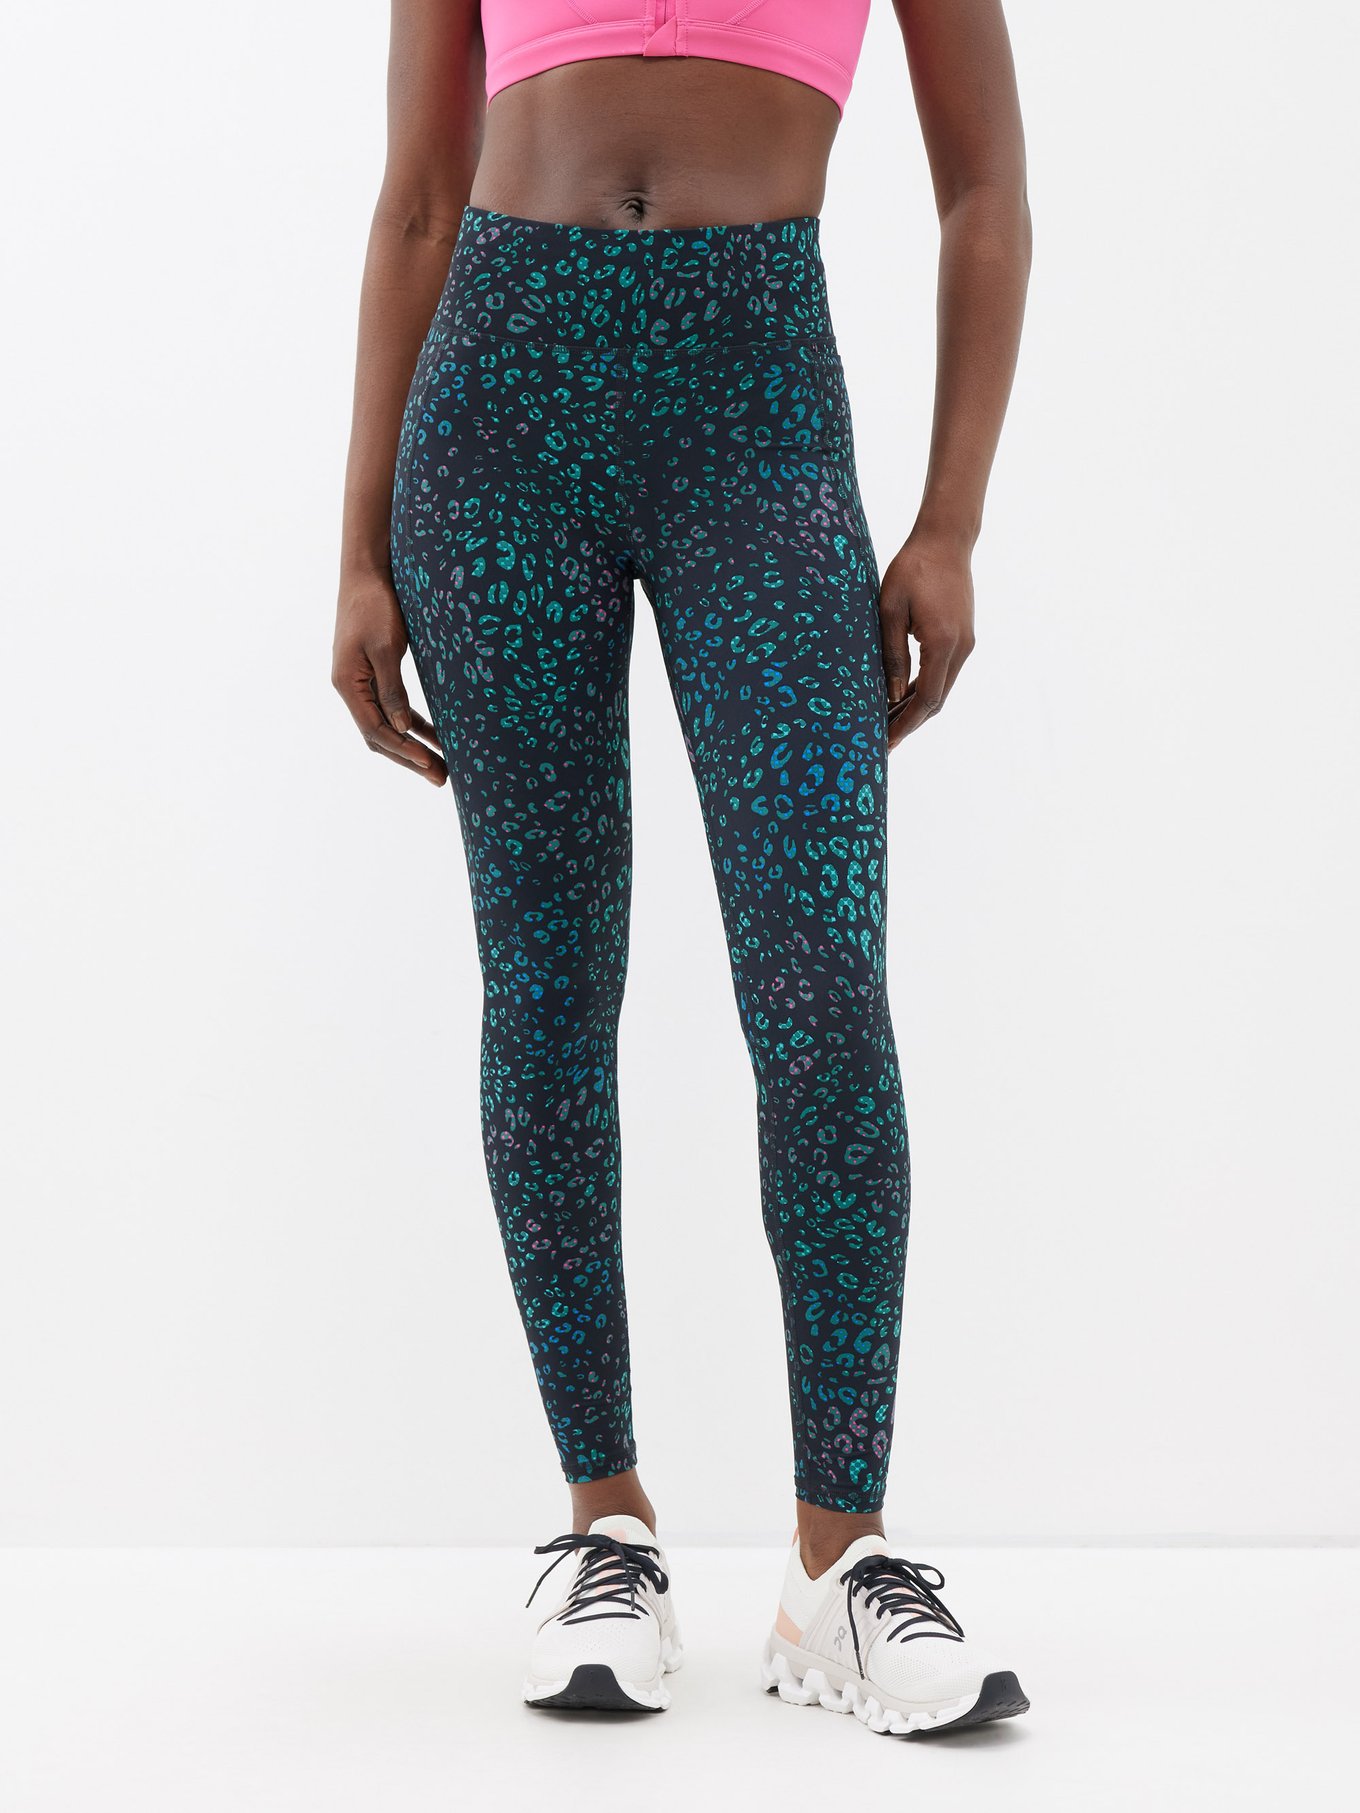 Sweaty Betty Zero Gravity Run Leggings, We Have 4 Very Important Words for  You: Workout Clothes on Sale